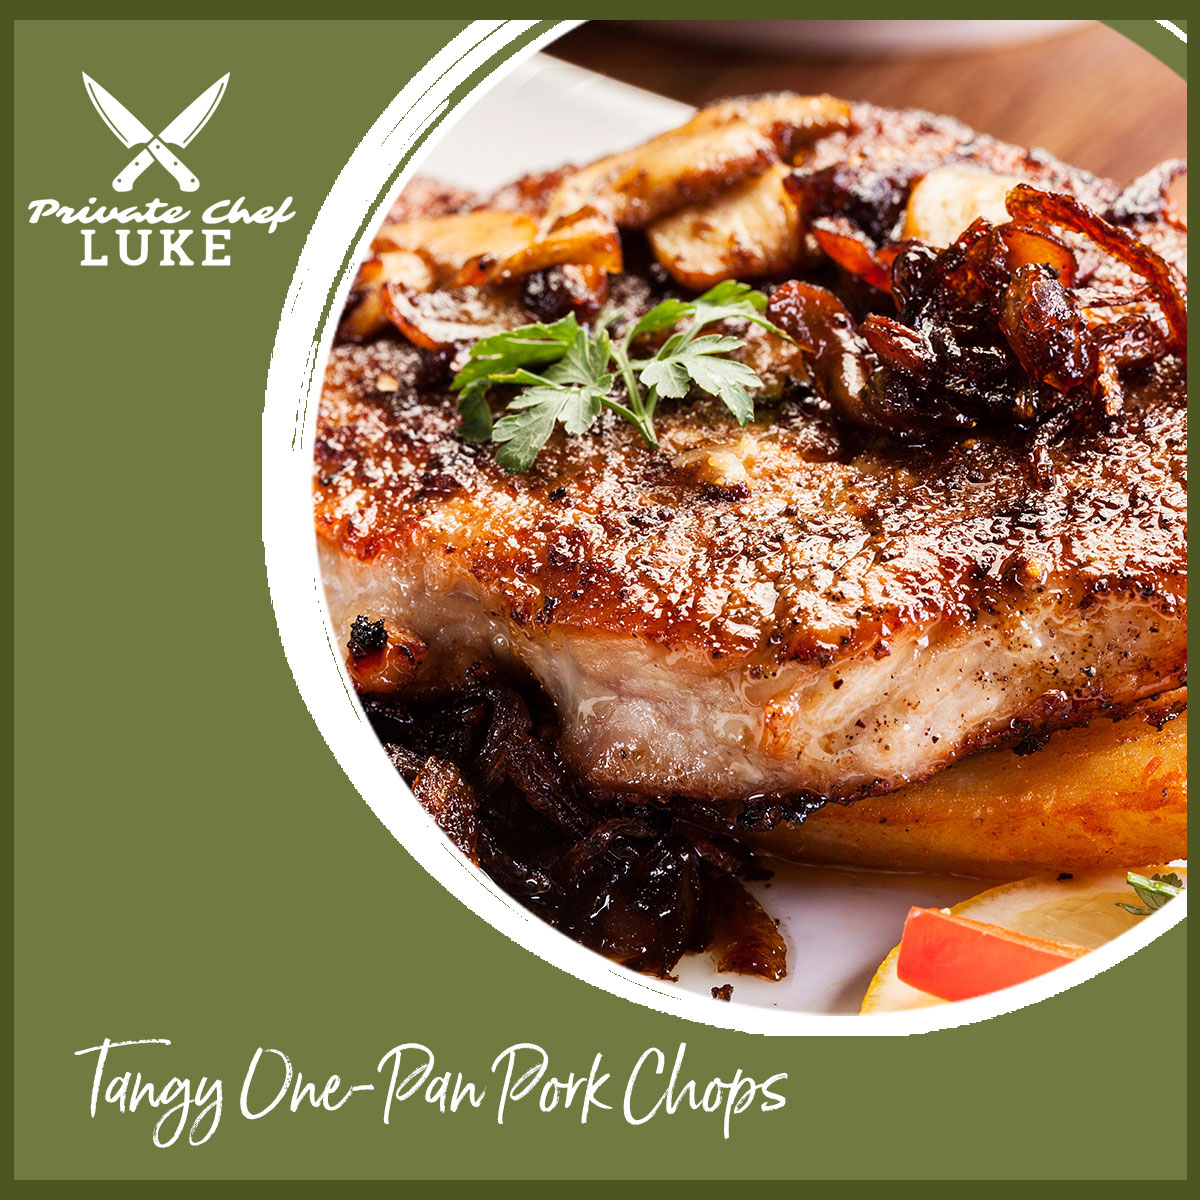 Click to view and download Chef's recipe for Tangy One Pan Pork Chops